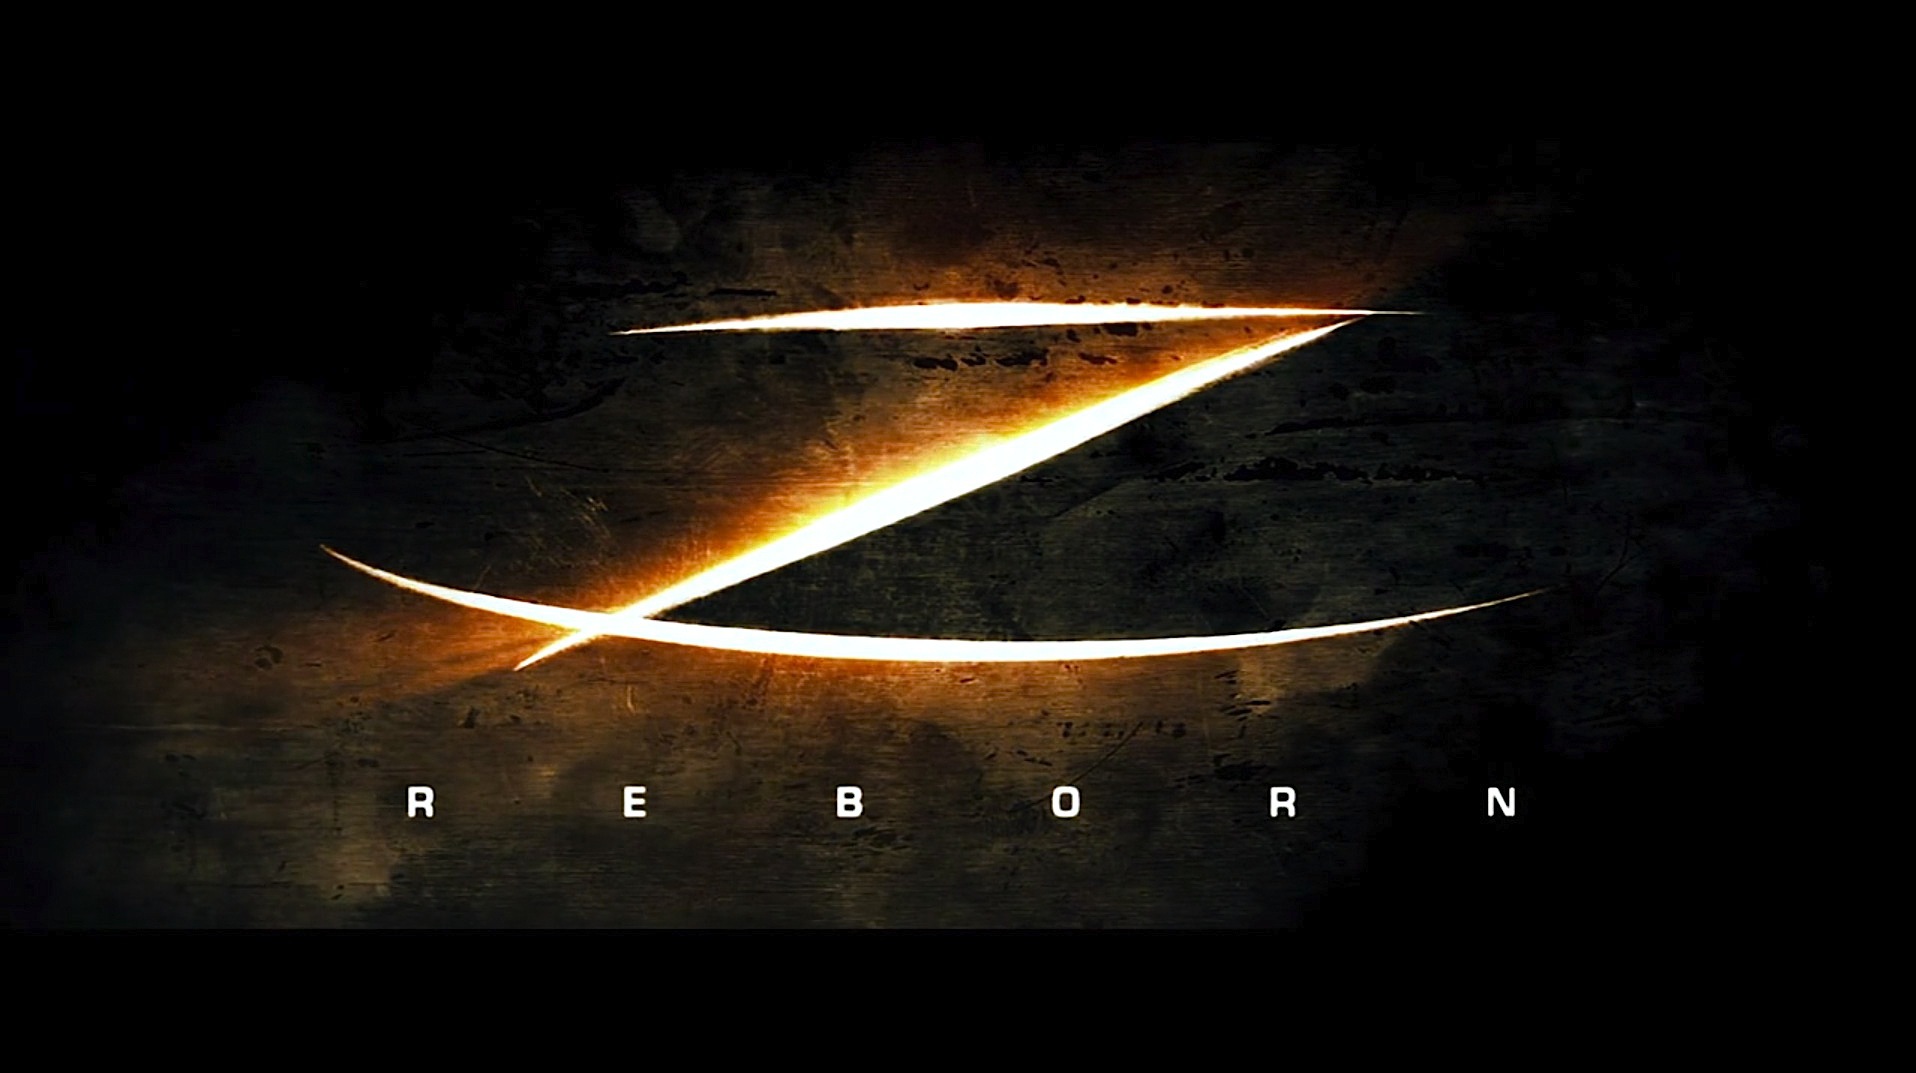 Zorro Generation Z Wallpaper And Image Pictures